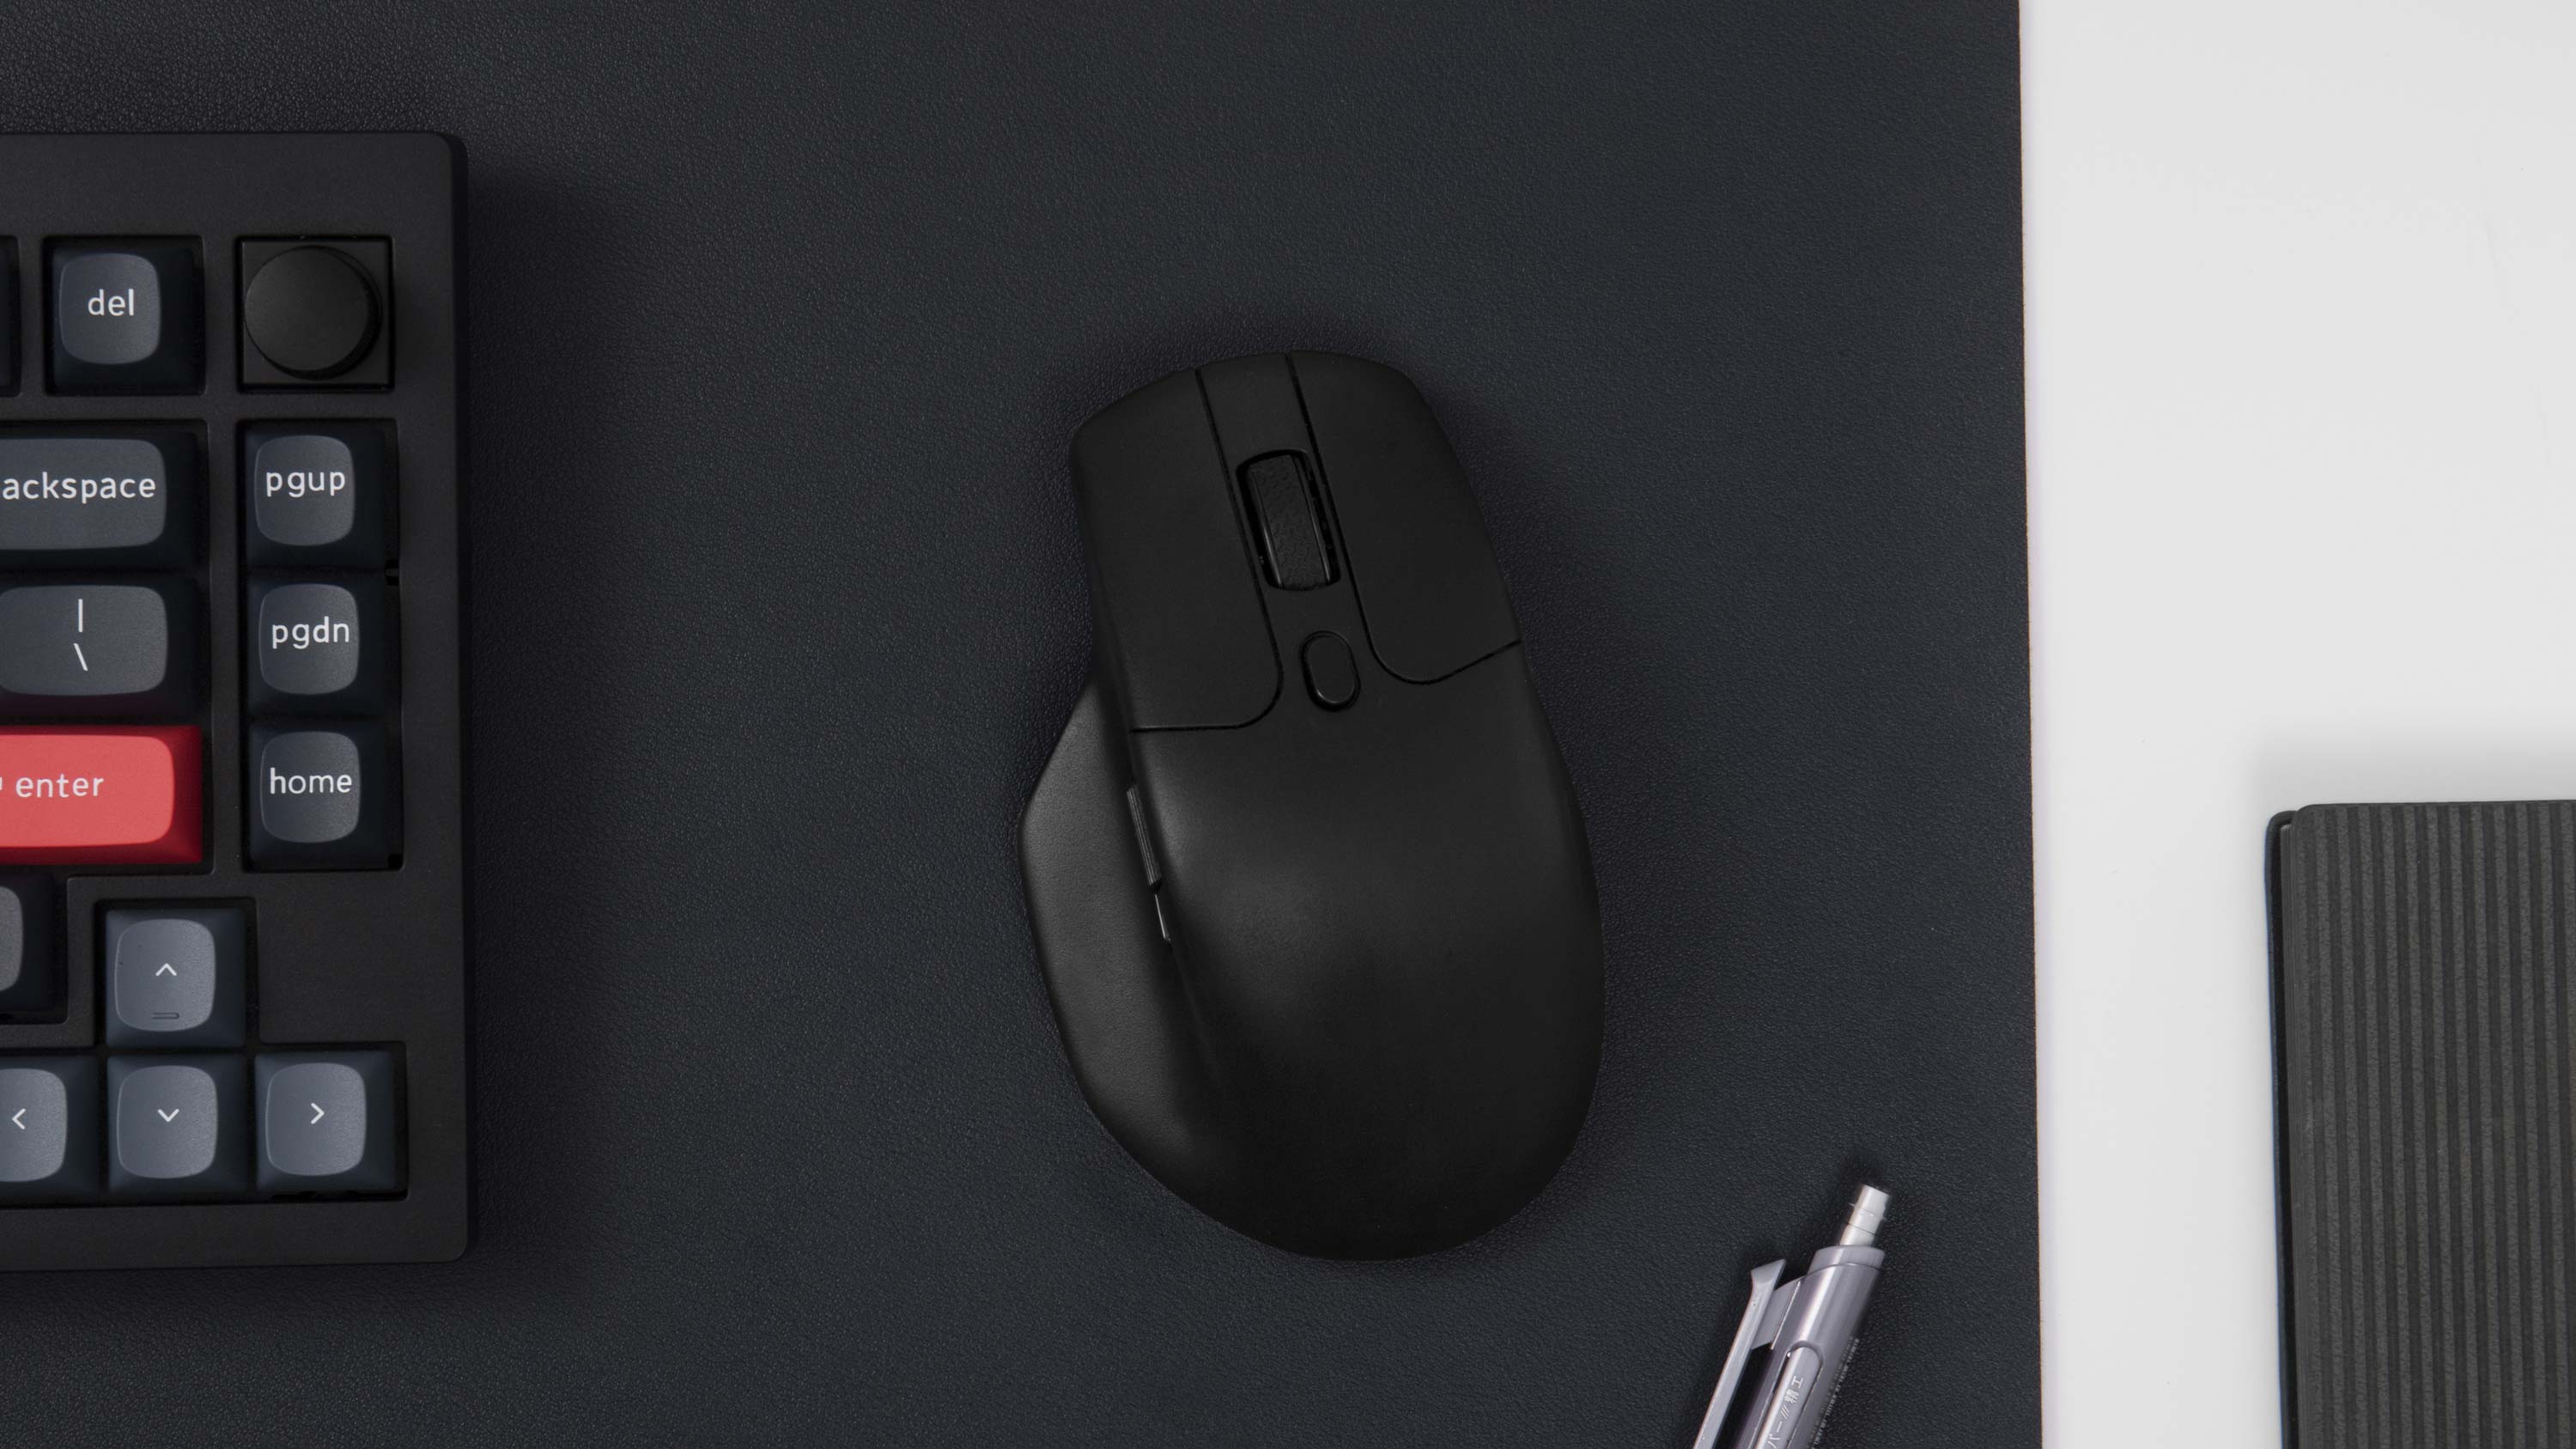 One of The Strongest Mouse Sensor of Keychron M6 Wireless Mouse